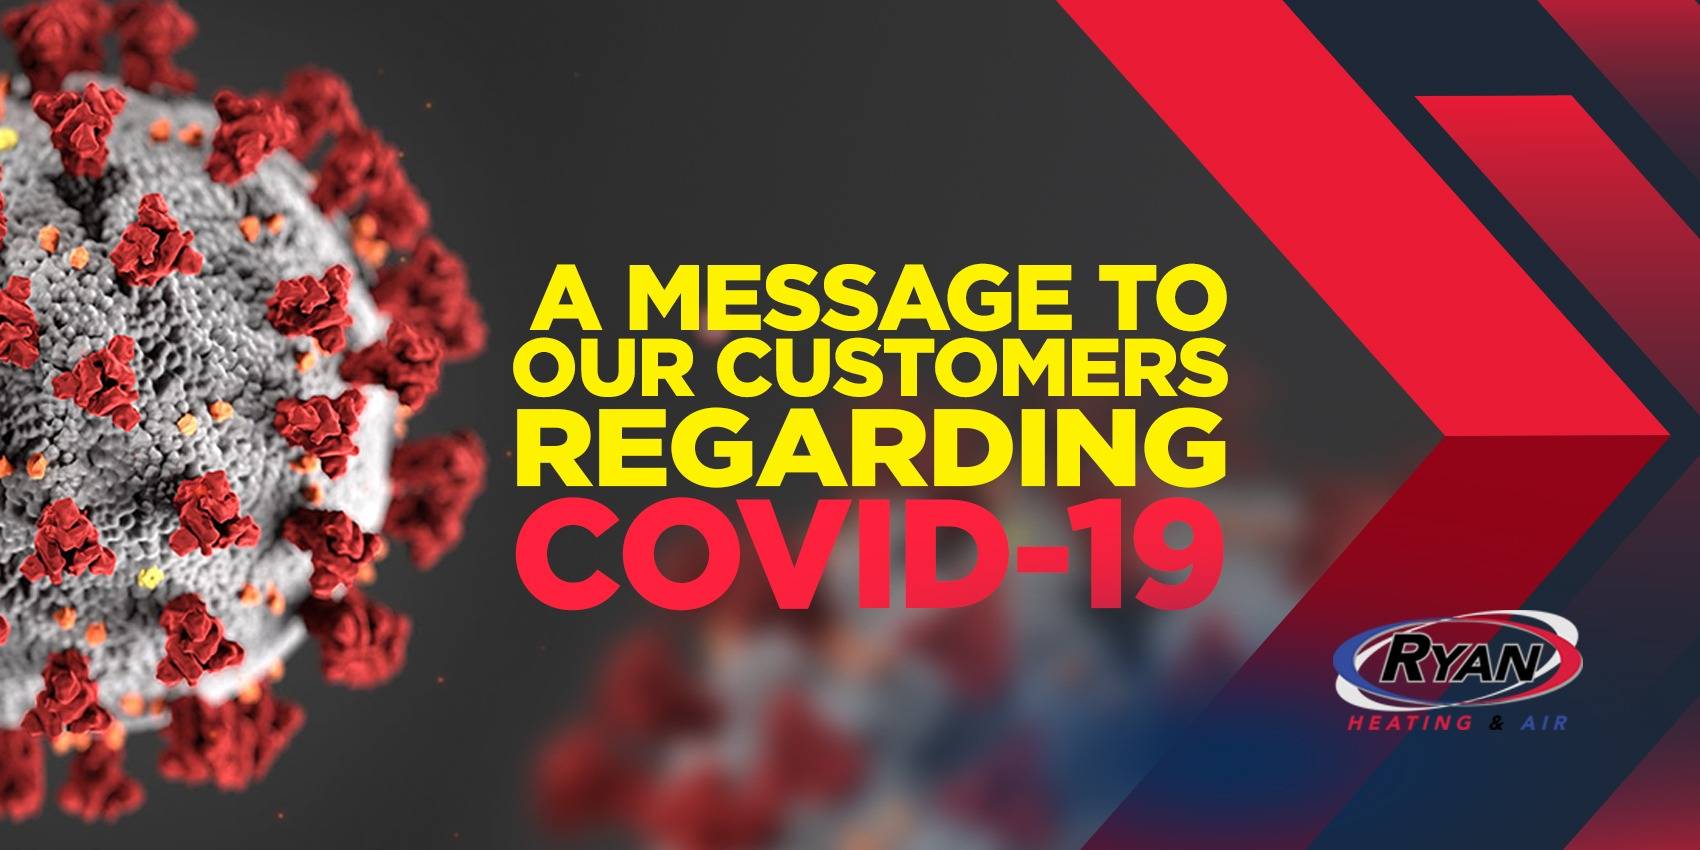 A MESSAGE TO OUR CUSTOMERS REGARDING COVID-19 by Ryan